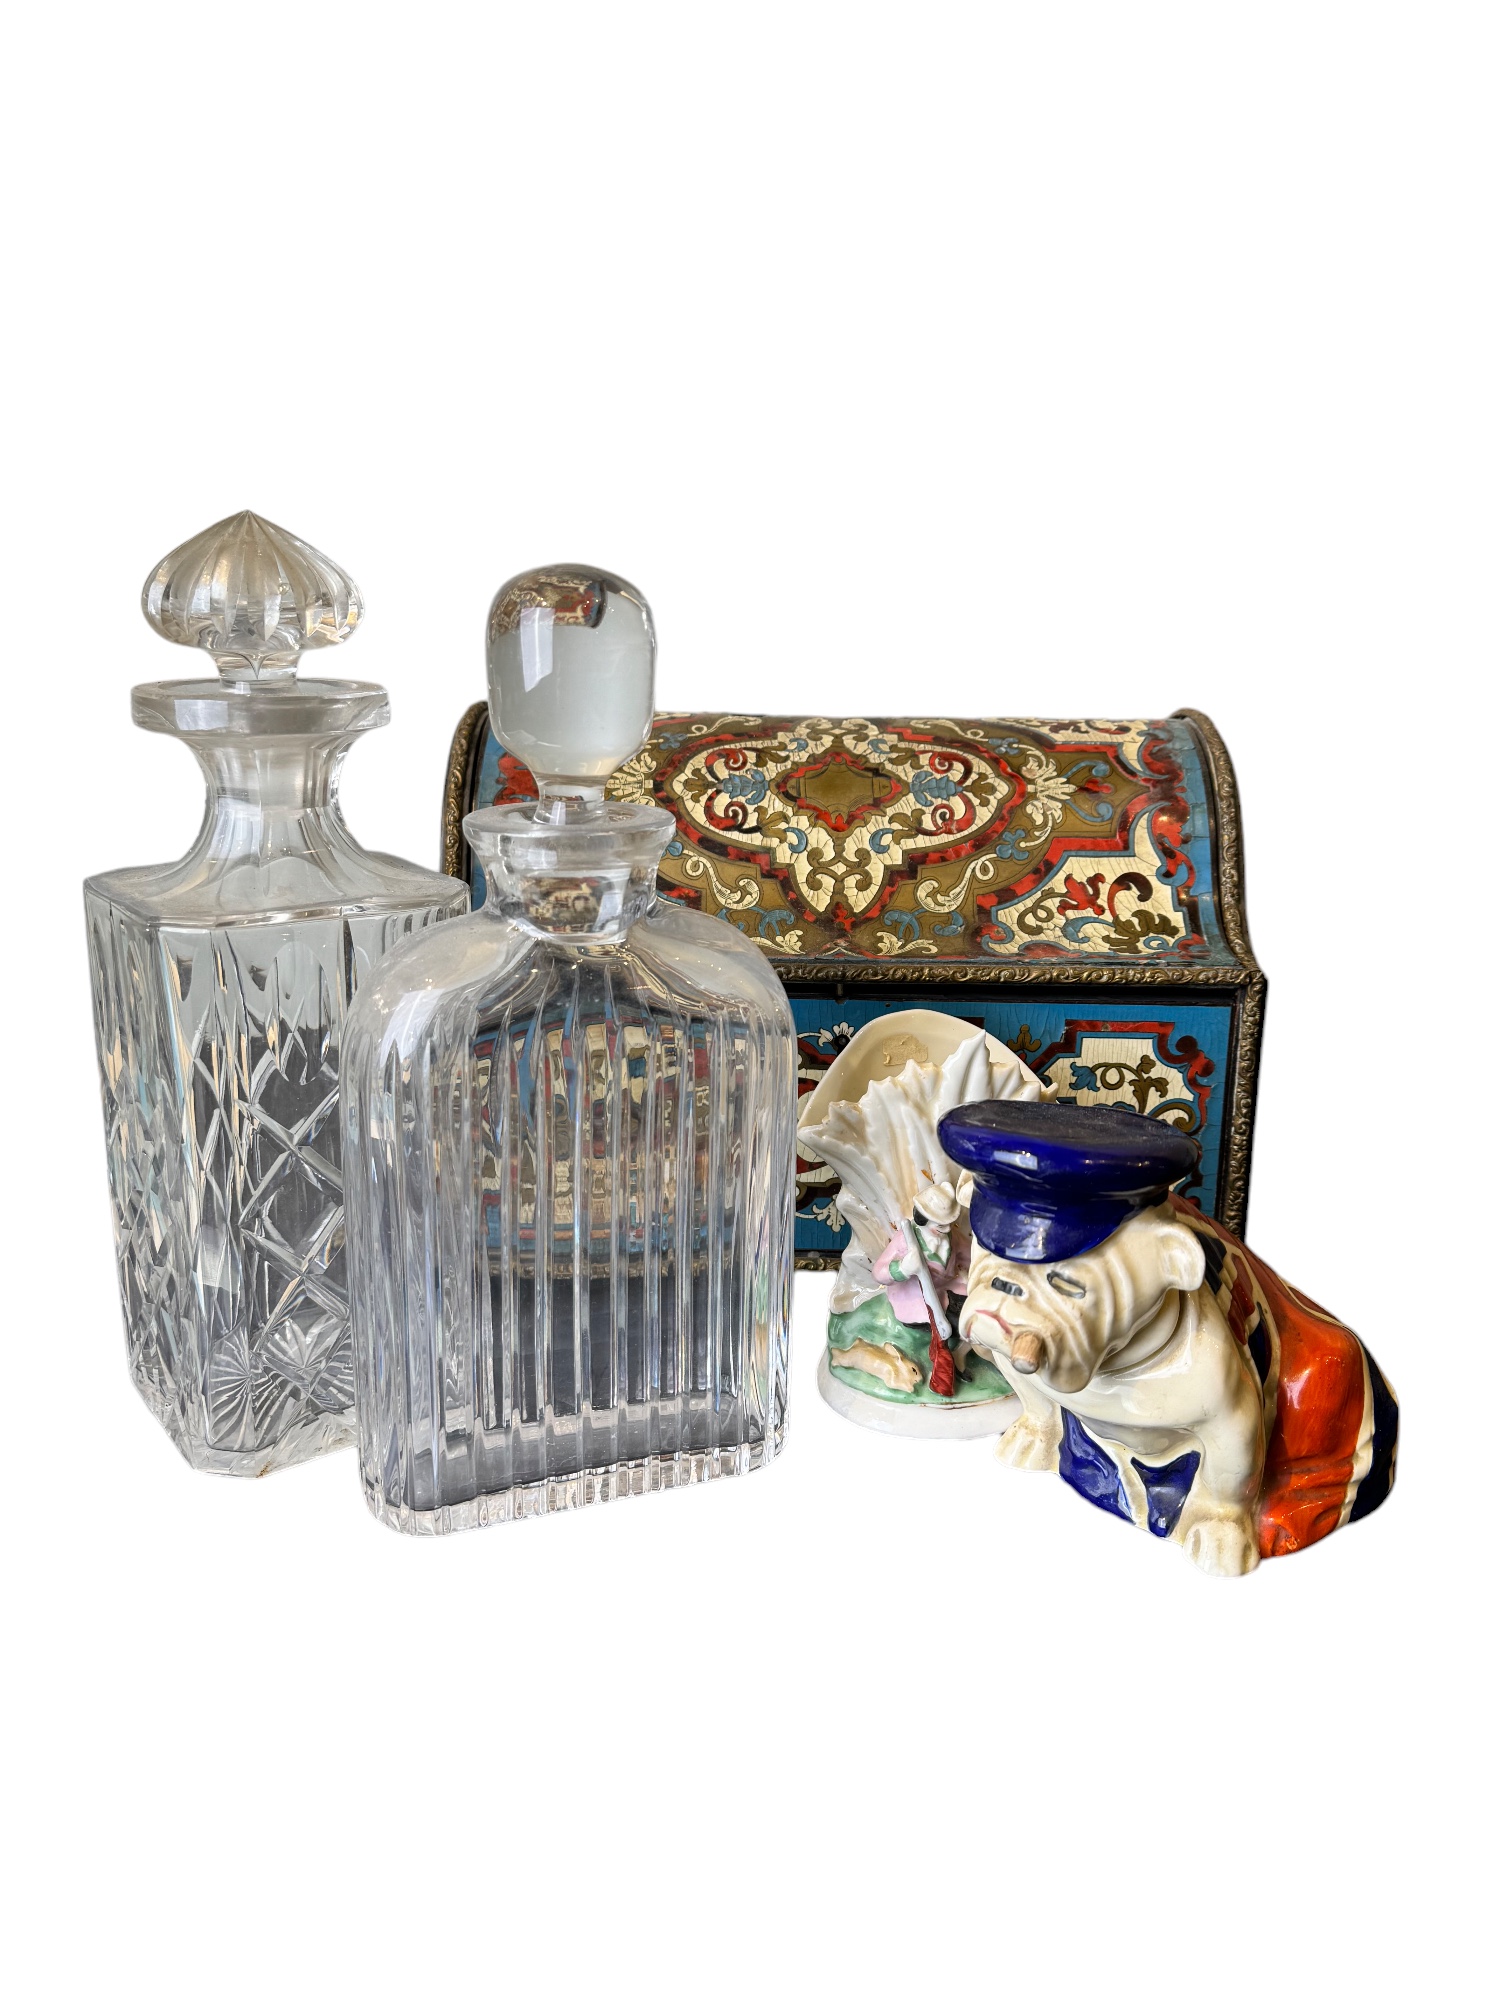 NO RESERVE: 20th Century, An eclectic selection of objets